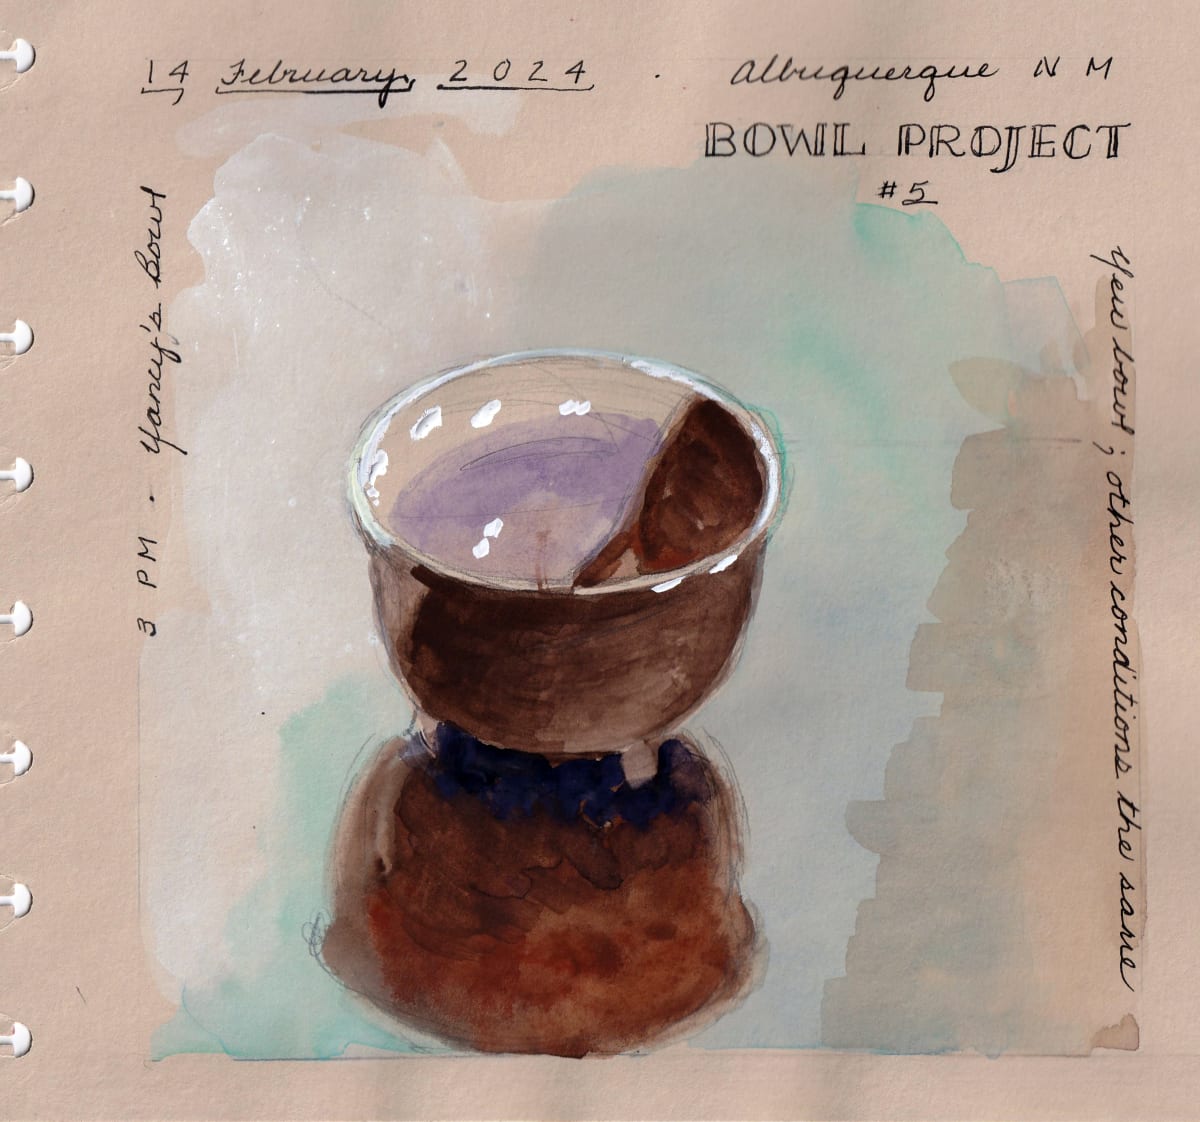 Journey Daybook Page by Margaret Pulis Herrick (Peggy)  Image: Bowl Project #5